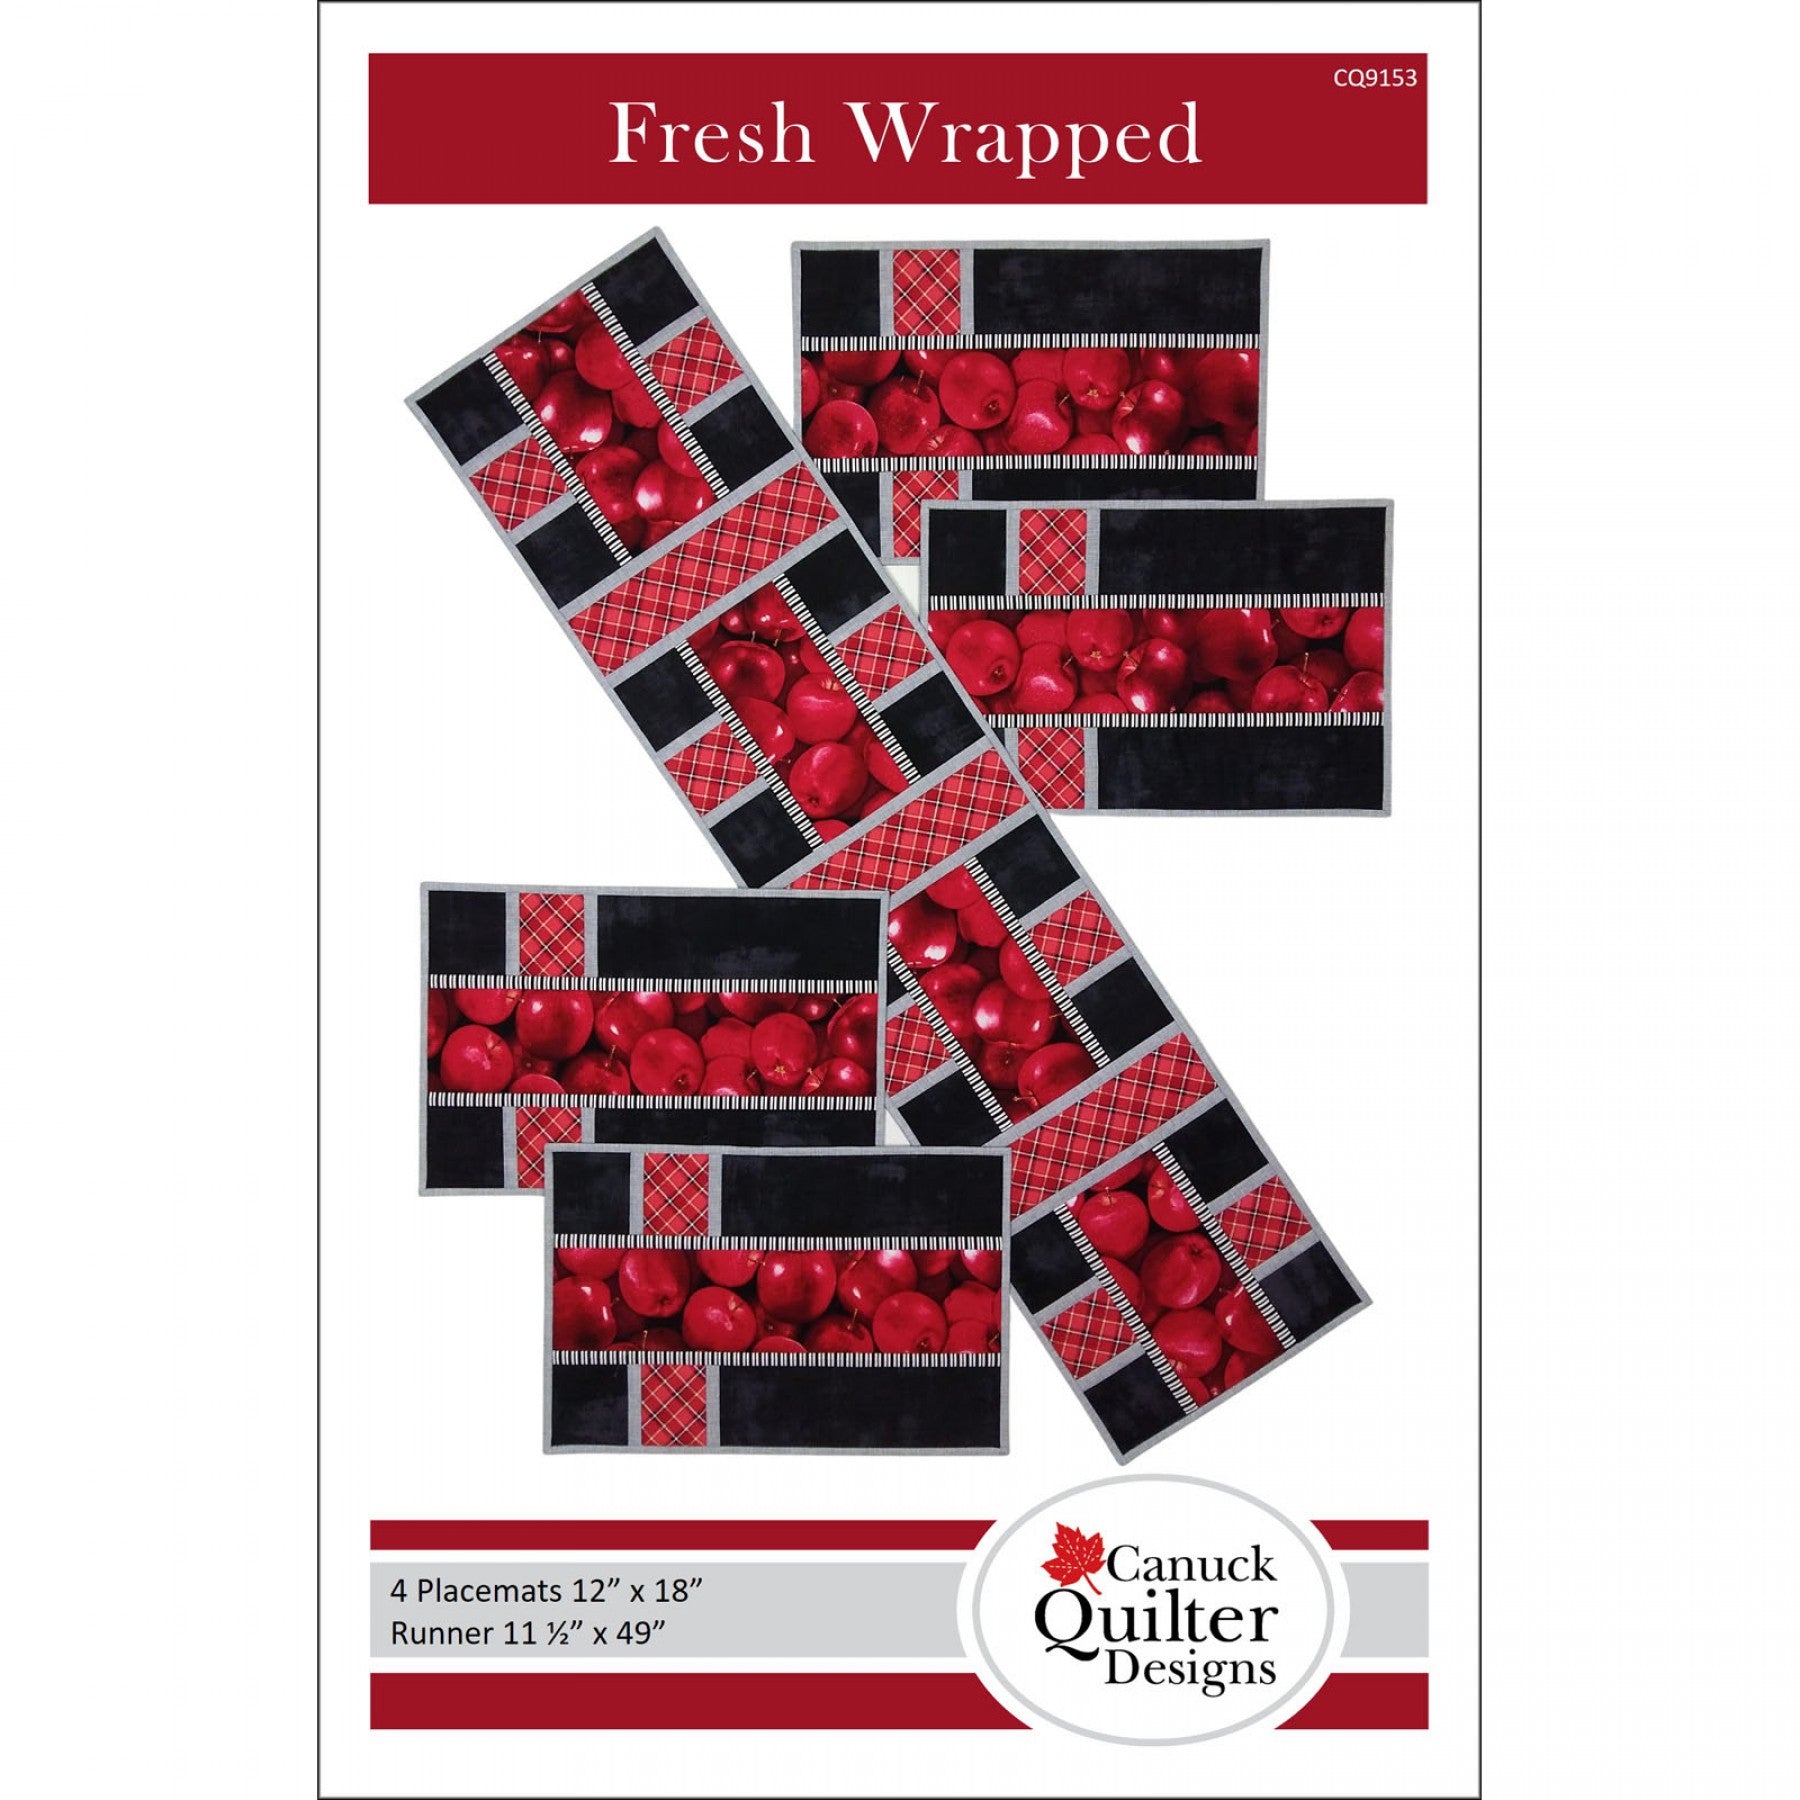 Fresh Wrapped Quilt Pattern by Joanne Kerton for Canuck Quilter Designs